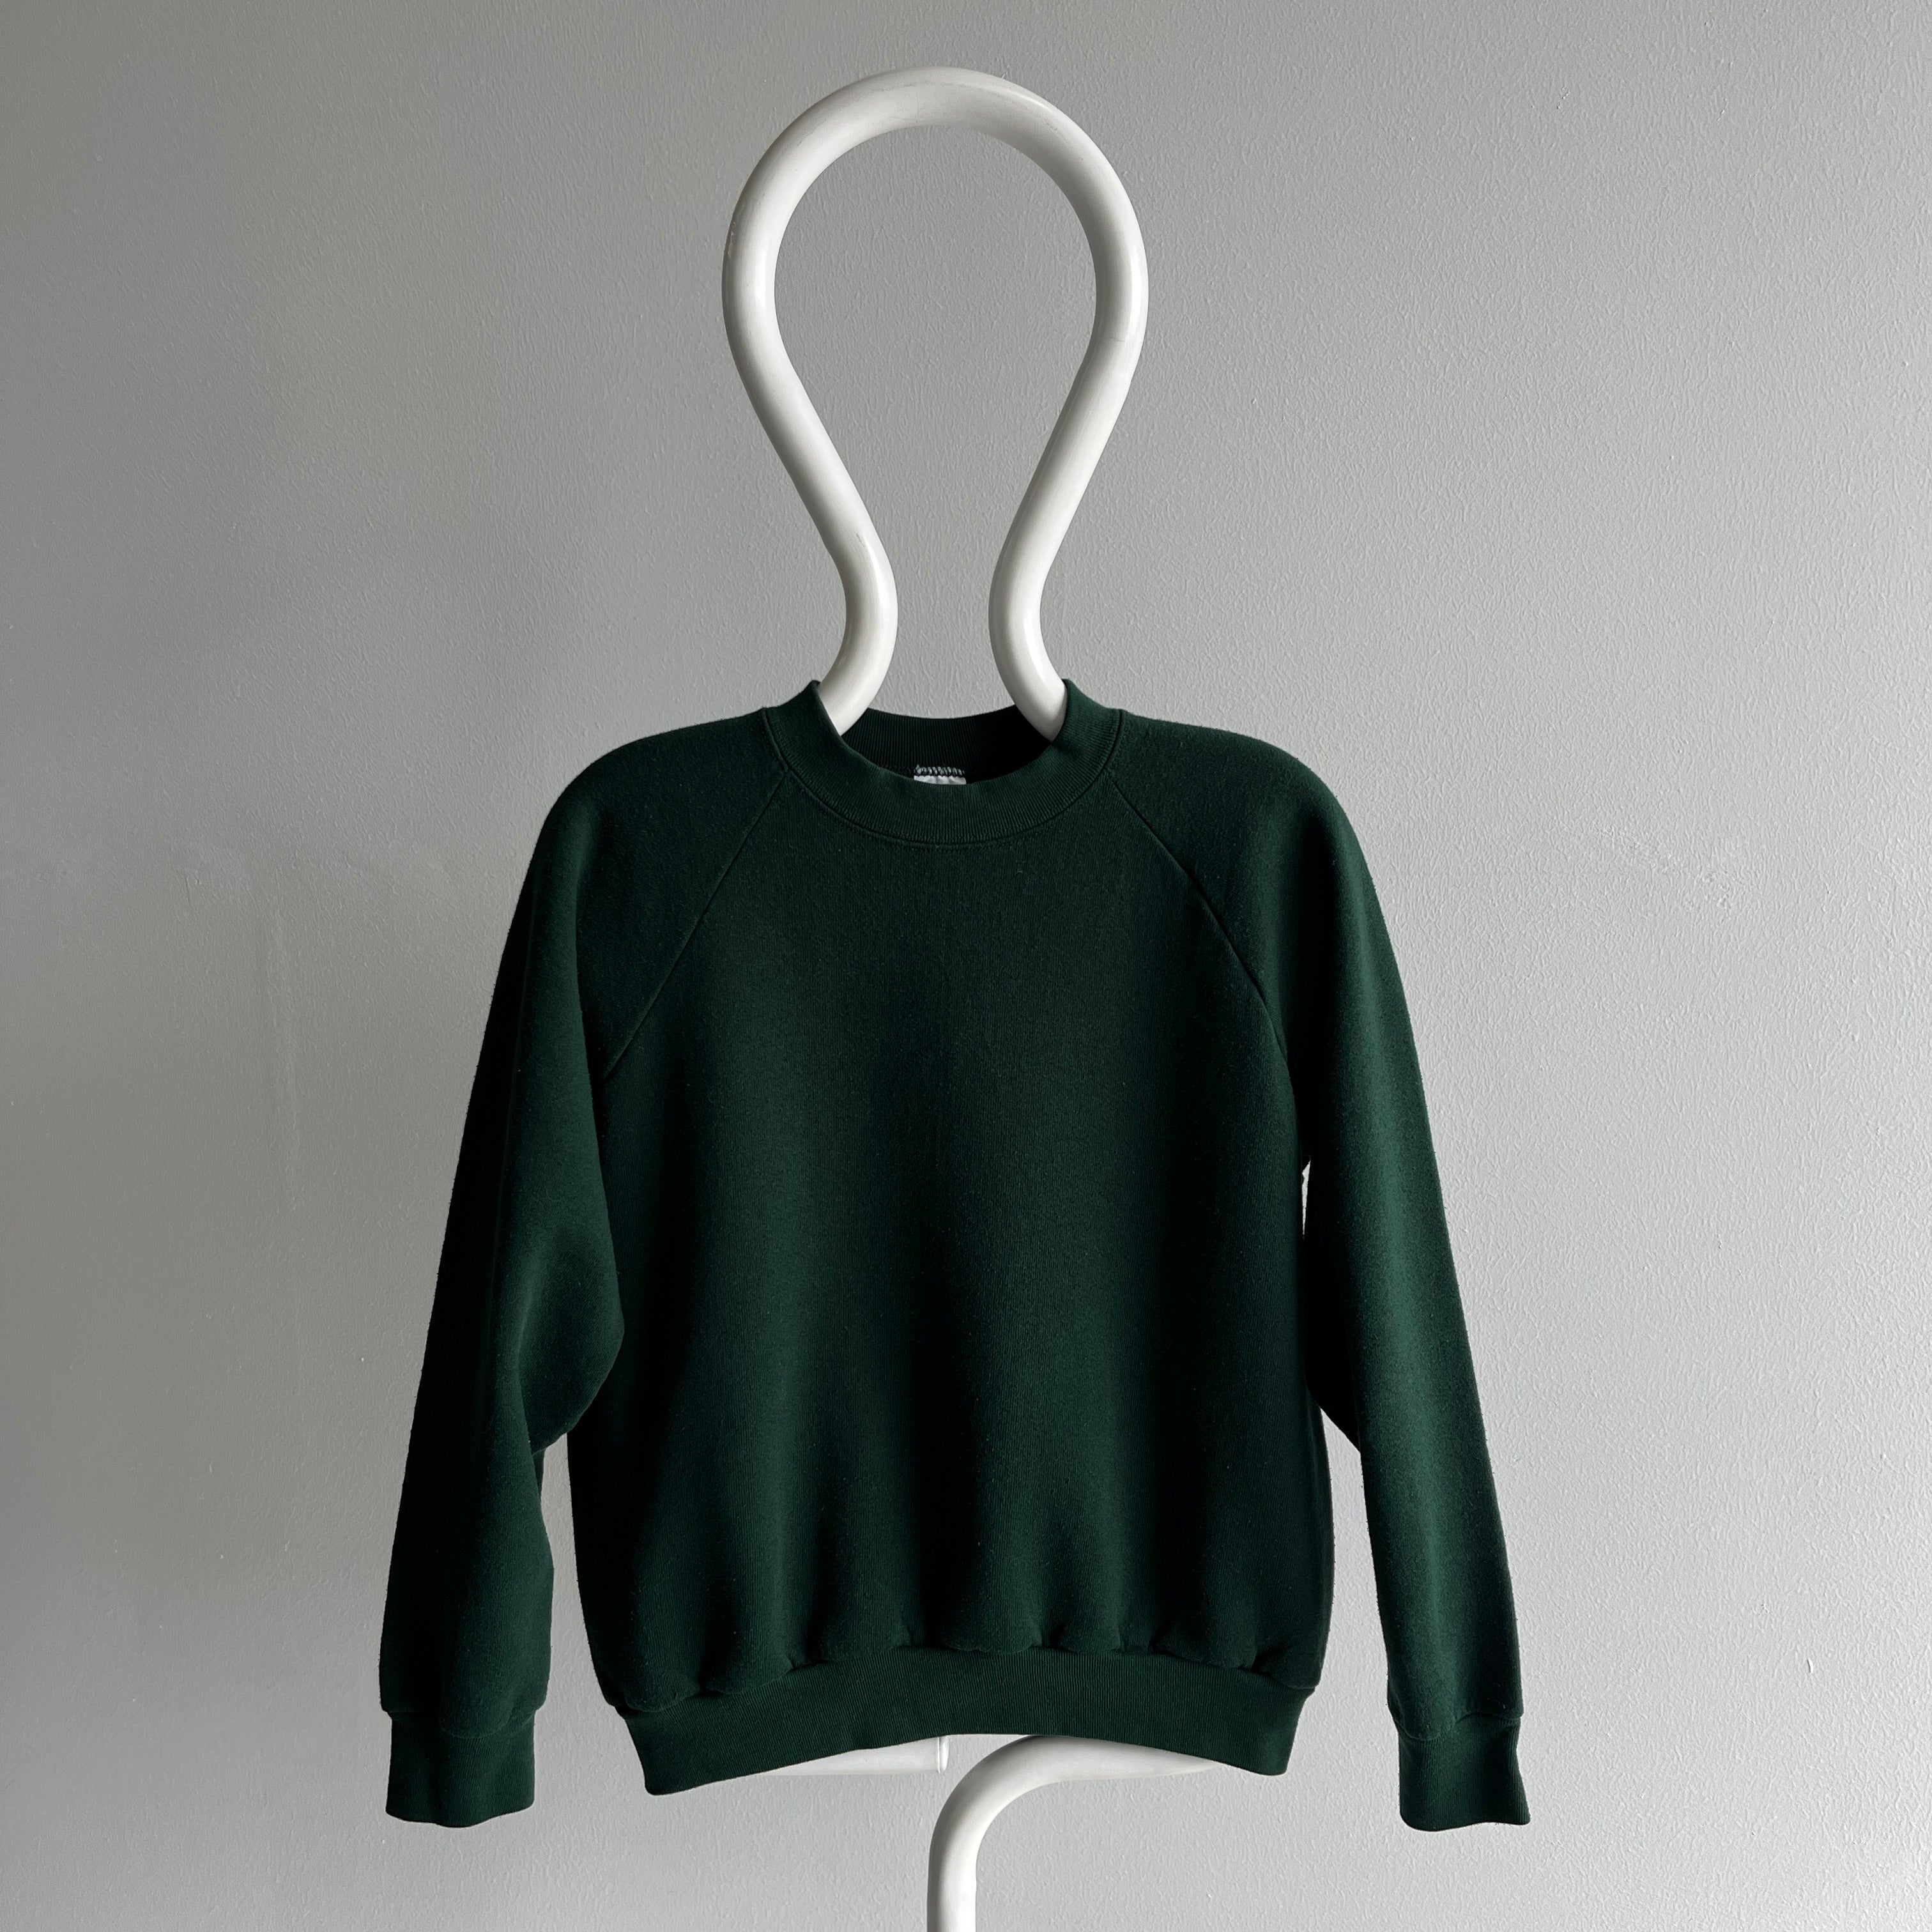 Vintage 90's Forest Green Classic Fly Fishing Sweatshirt